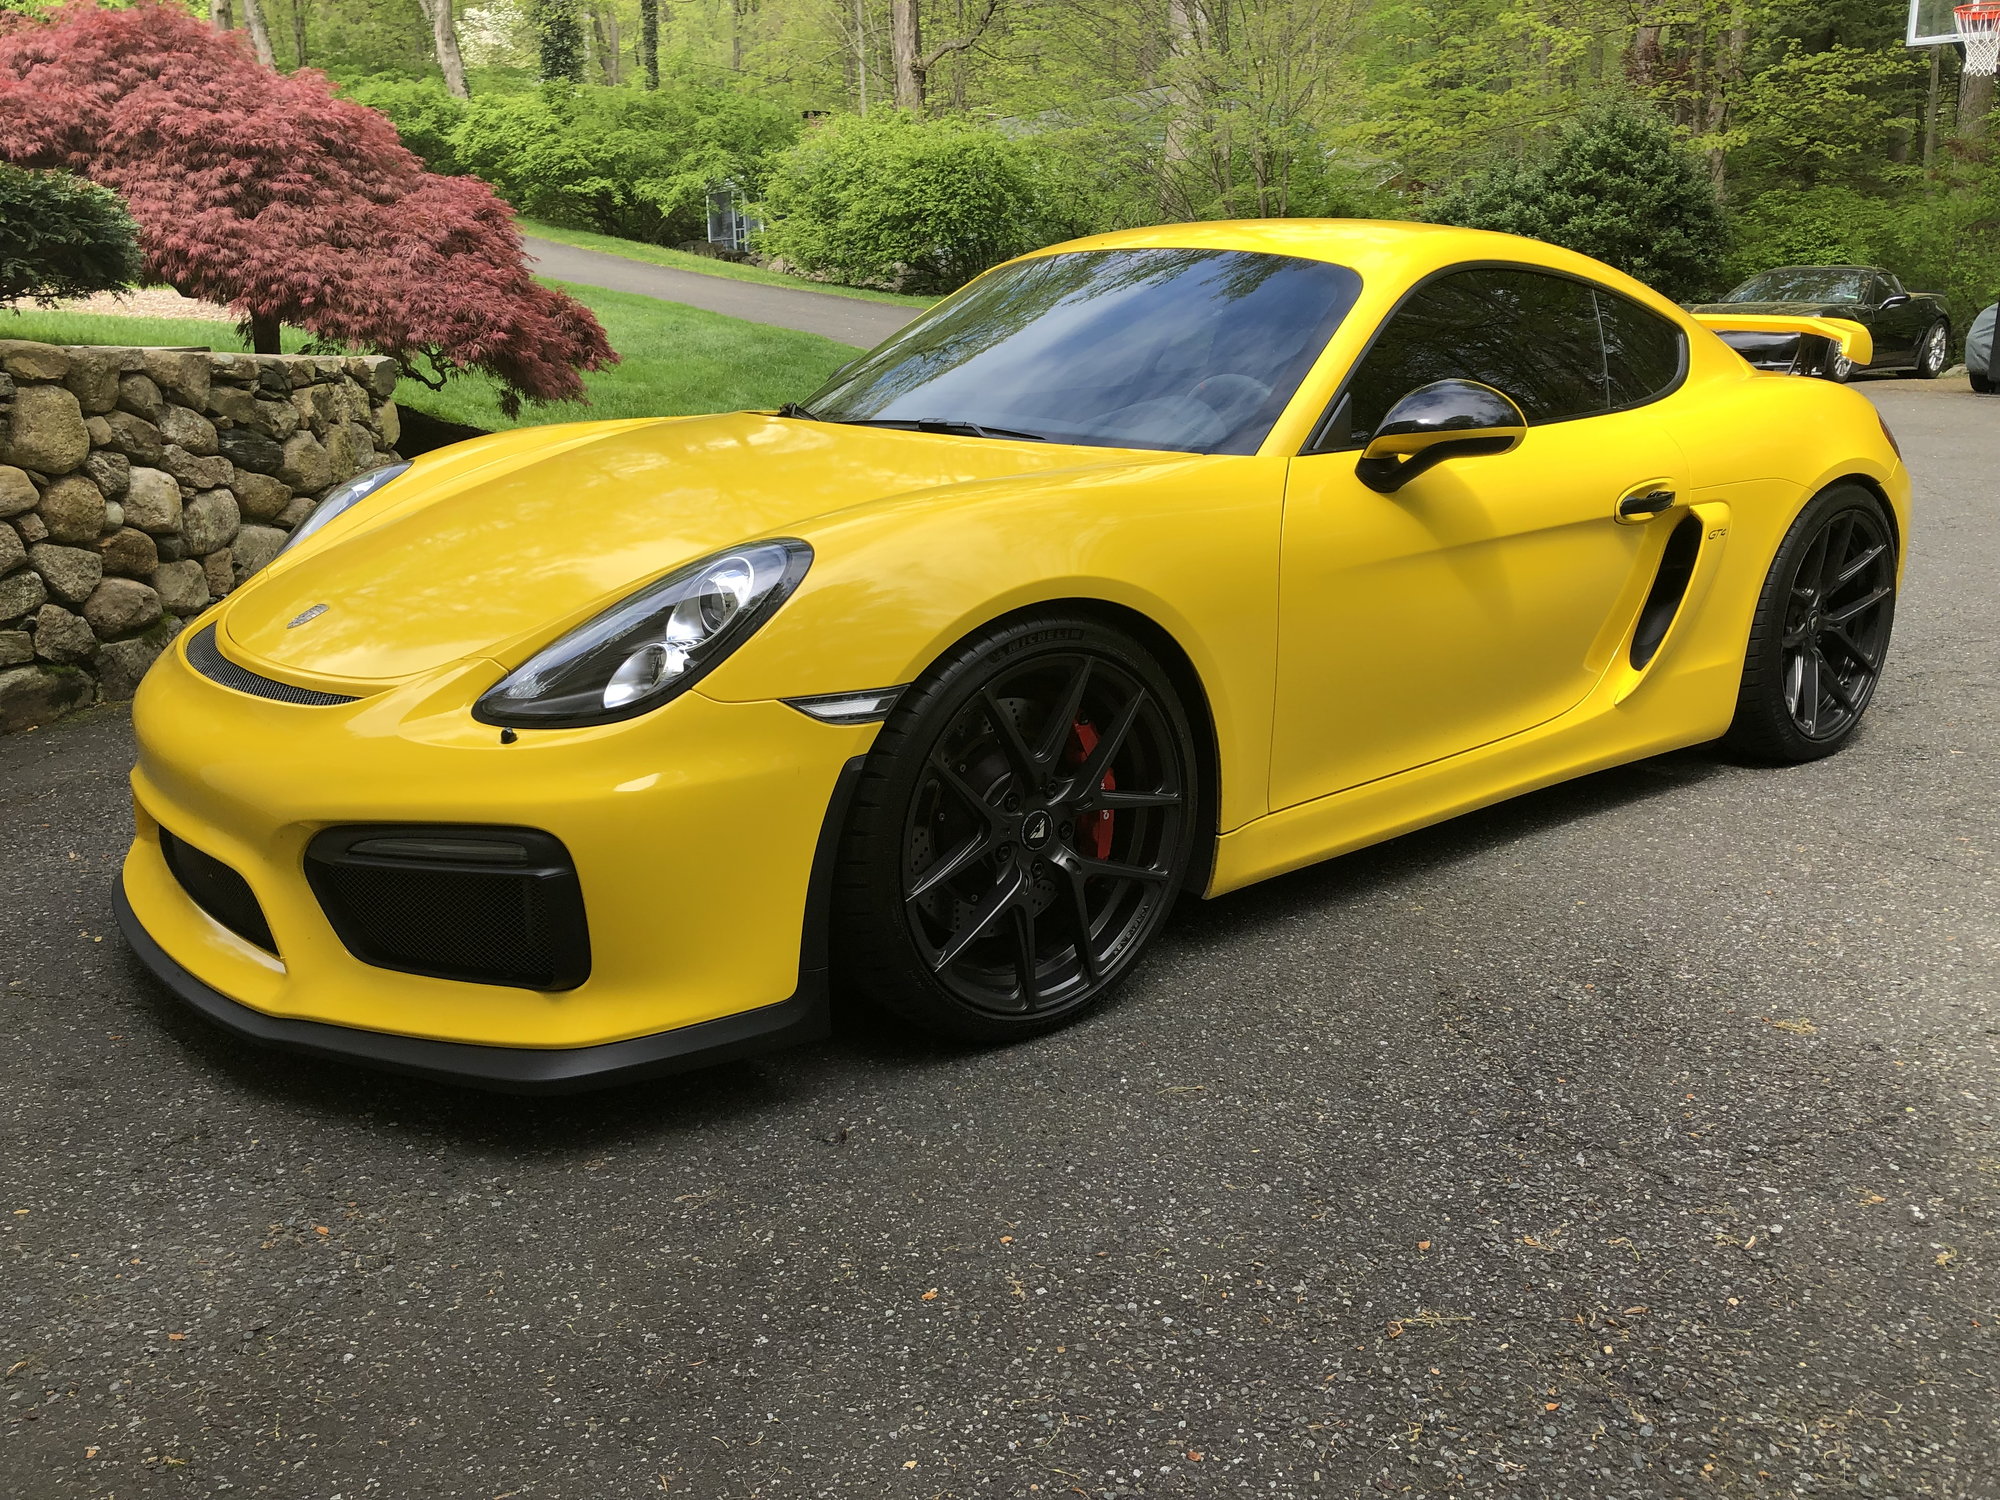 2014 Porsche Cayman - 2014 low mileage Cayman S in Racing Yellow wrap or pristine white - Used - VIN WP0AB2A87EK191524 - 17,000 Miles - 6 cyl - 2WD - Automatic - Coupe - Yellow - Wilton, CT 06897, United States